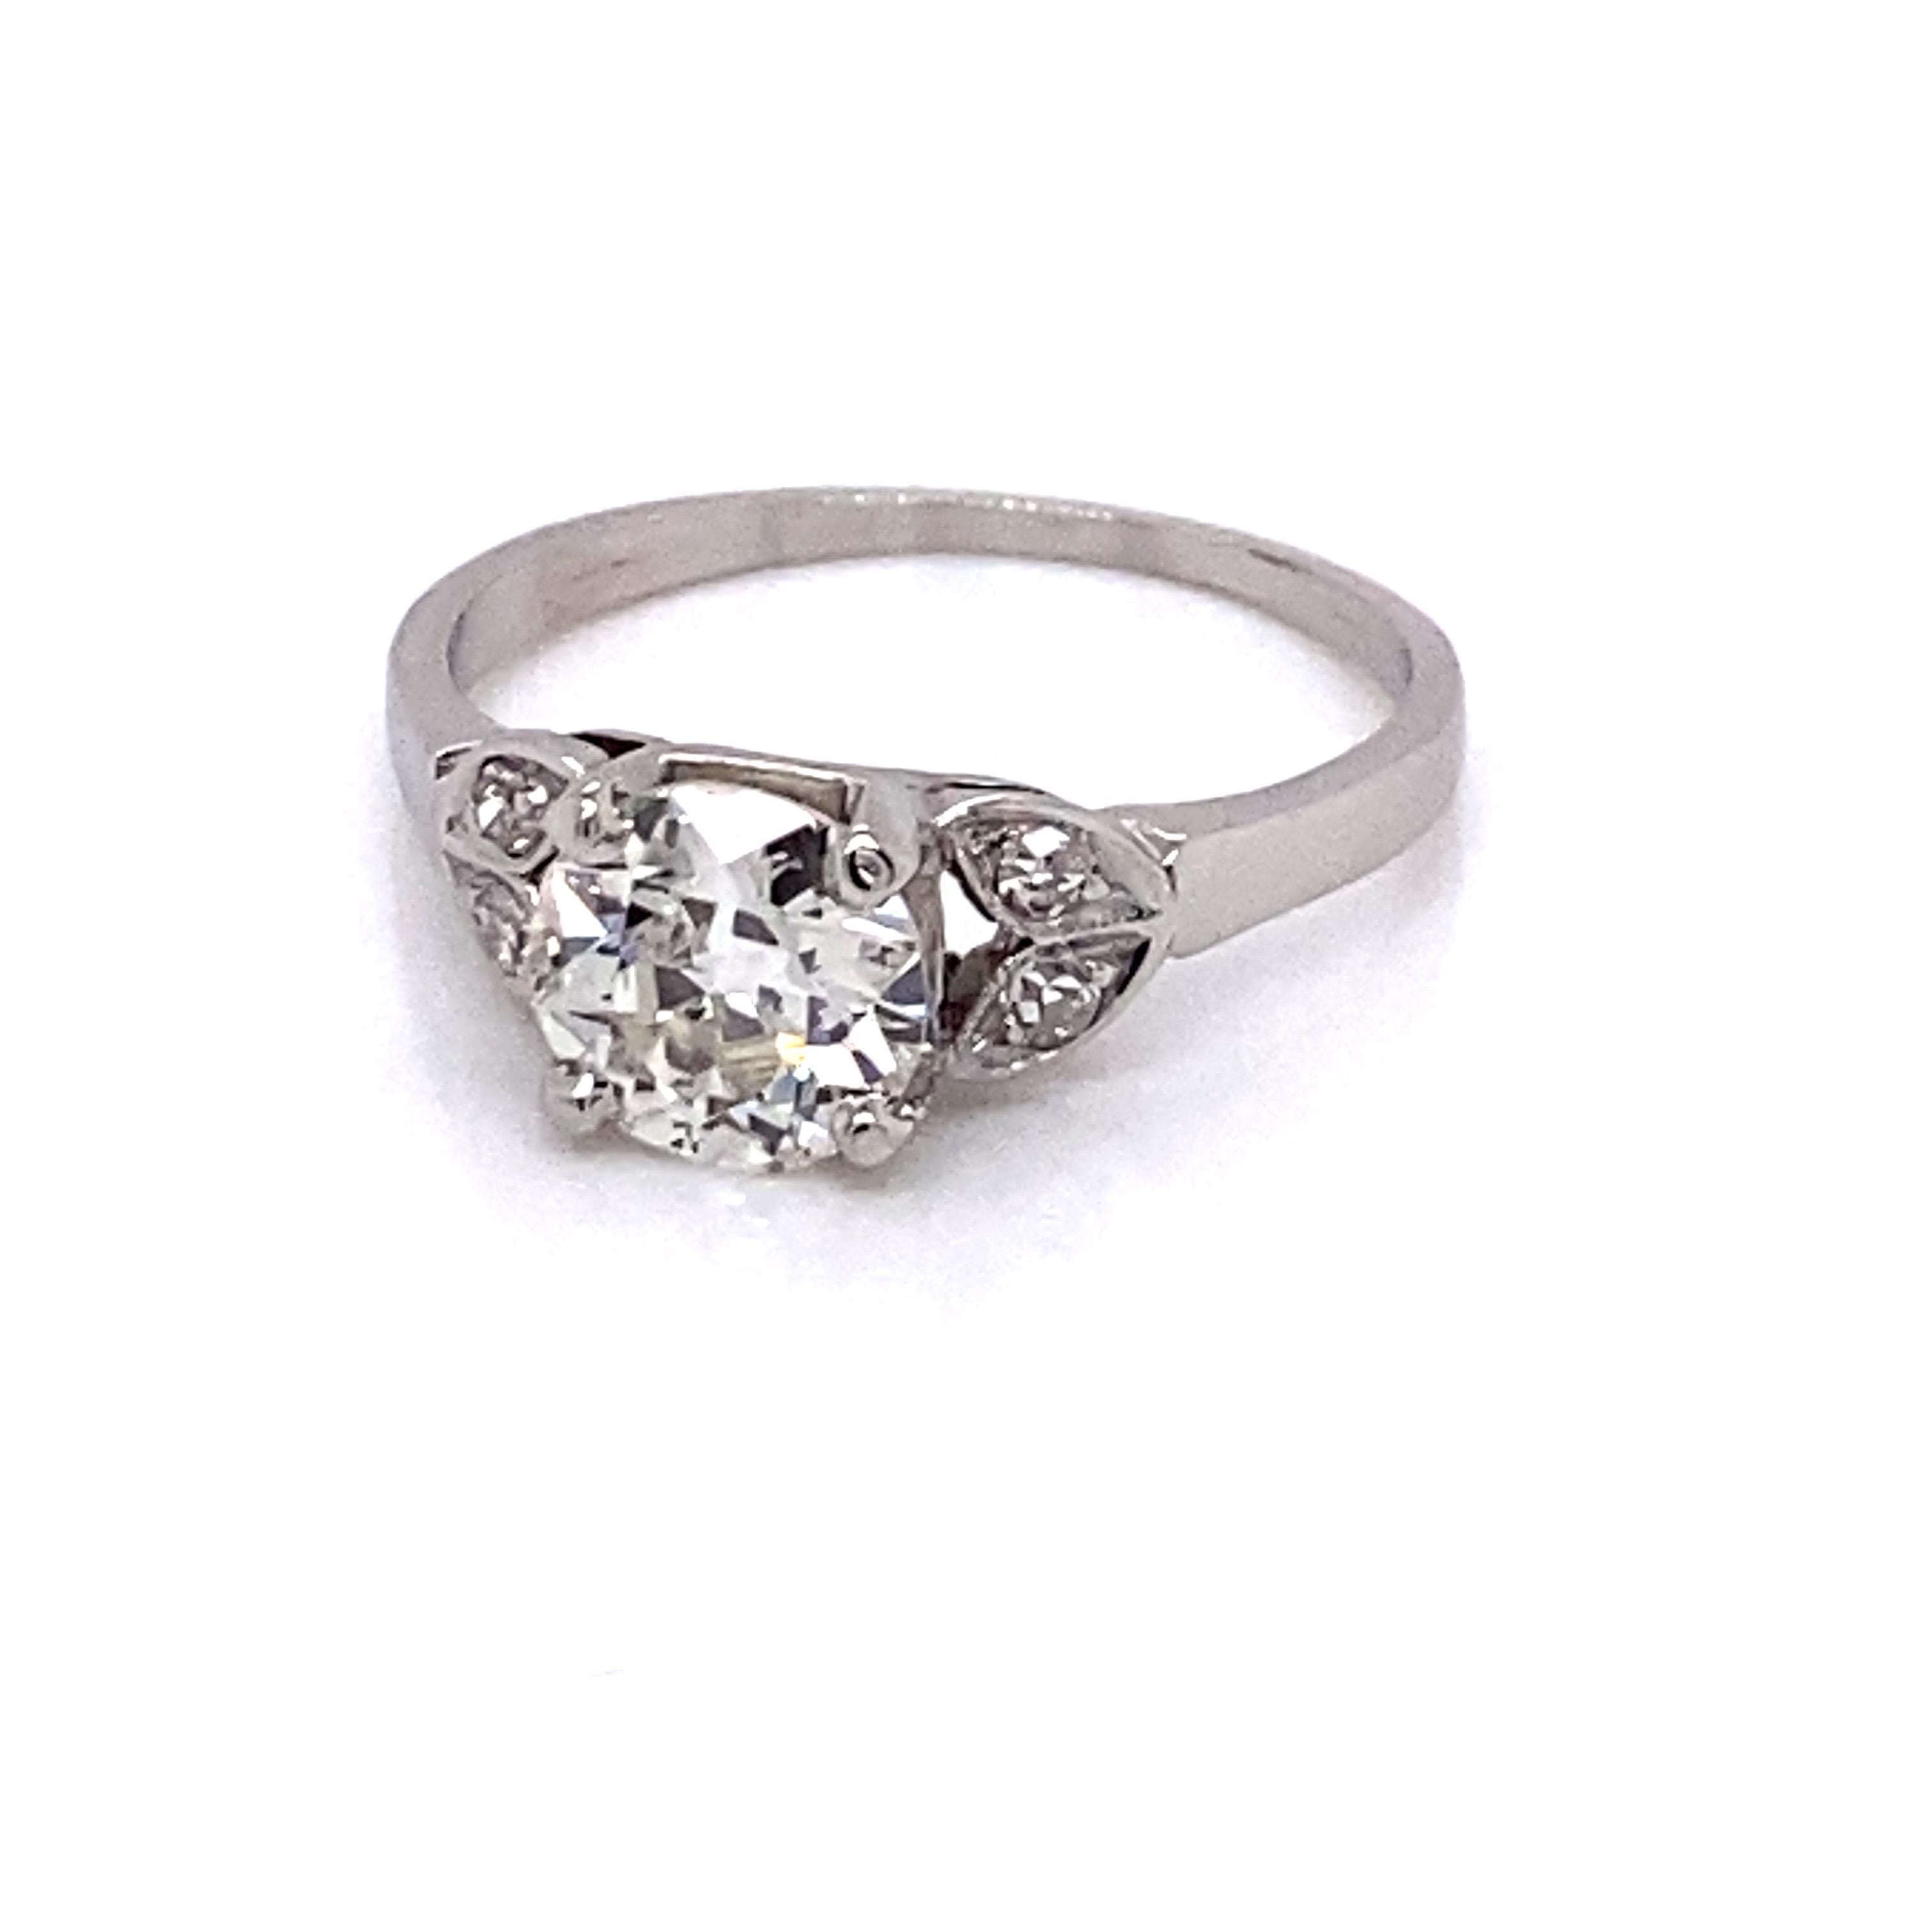 Vintage Platinum Art Deco Diamond Engagement Ring - Center Eurpean cut diamond weighs 1.01ct with J color and SI1 clarity. The diamond is set in a platinum 4 prong head and is accented with 2 leafs on each side with 1 single cut diamond in each leaf